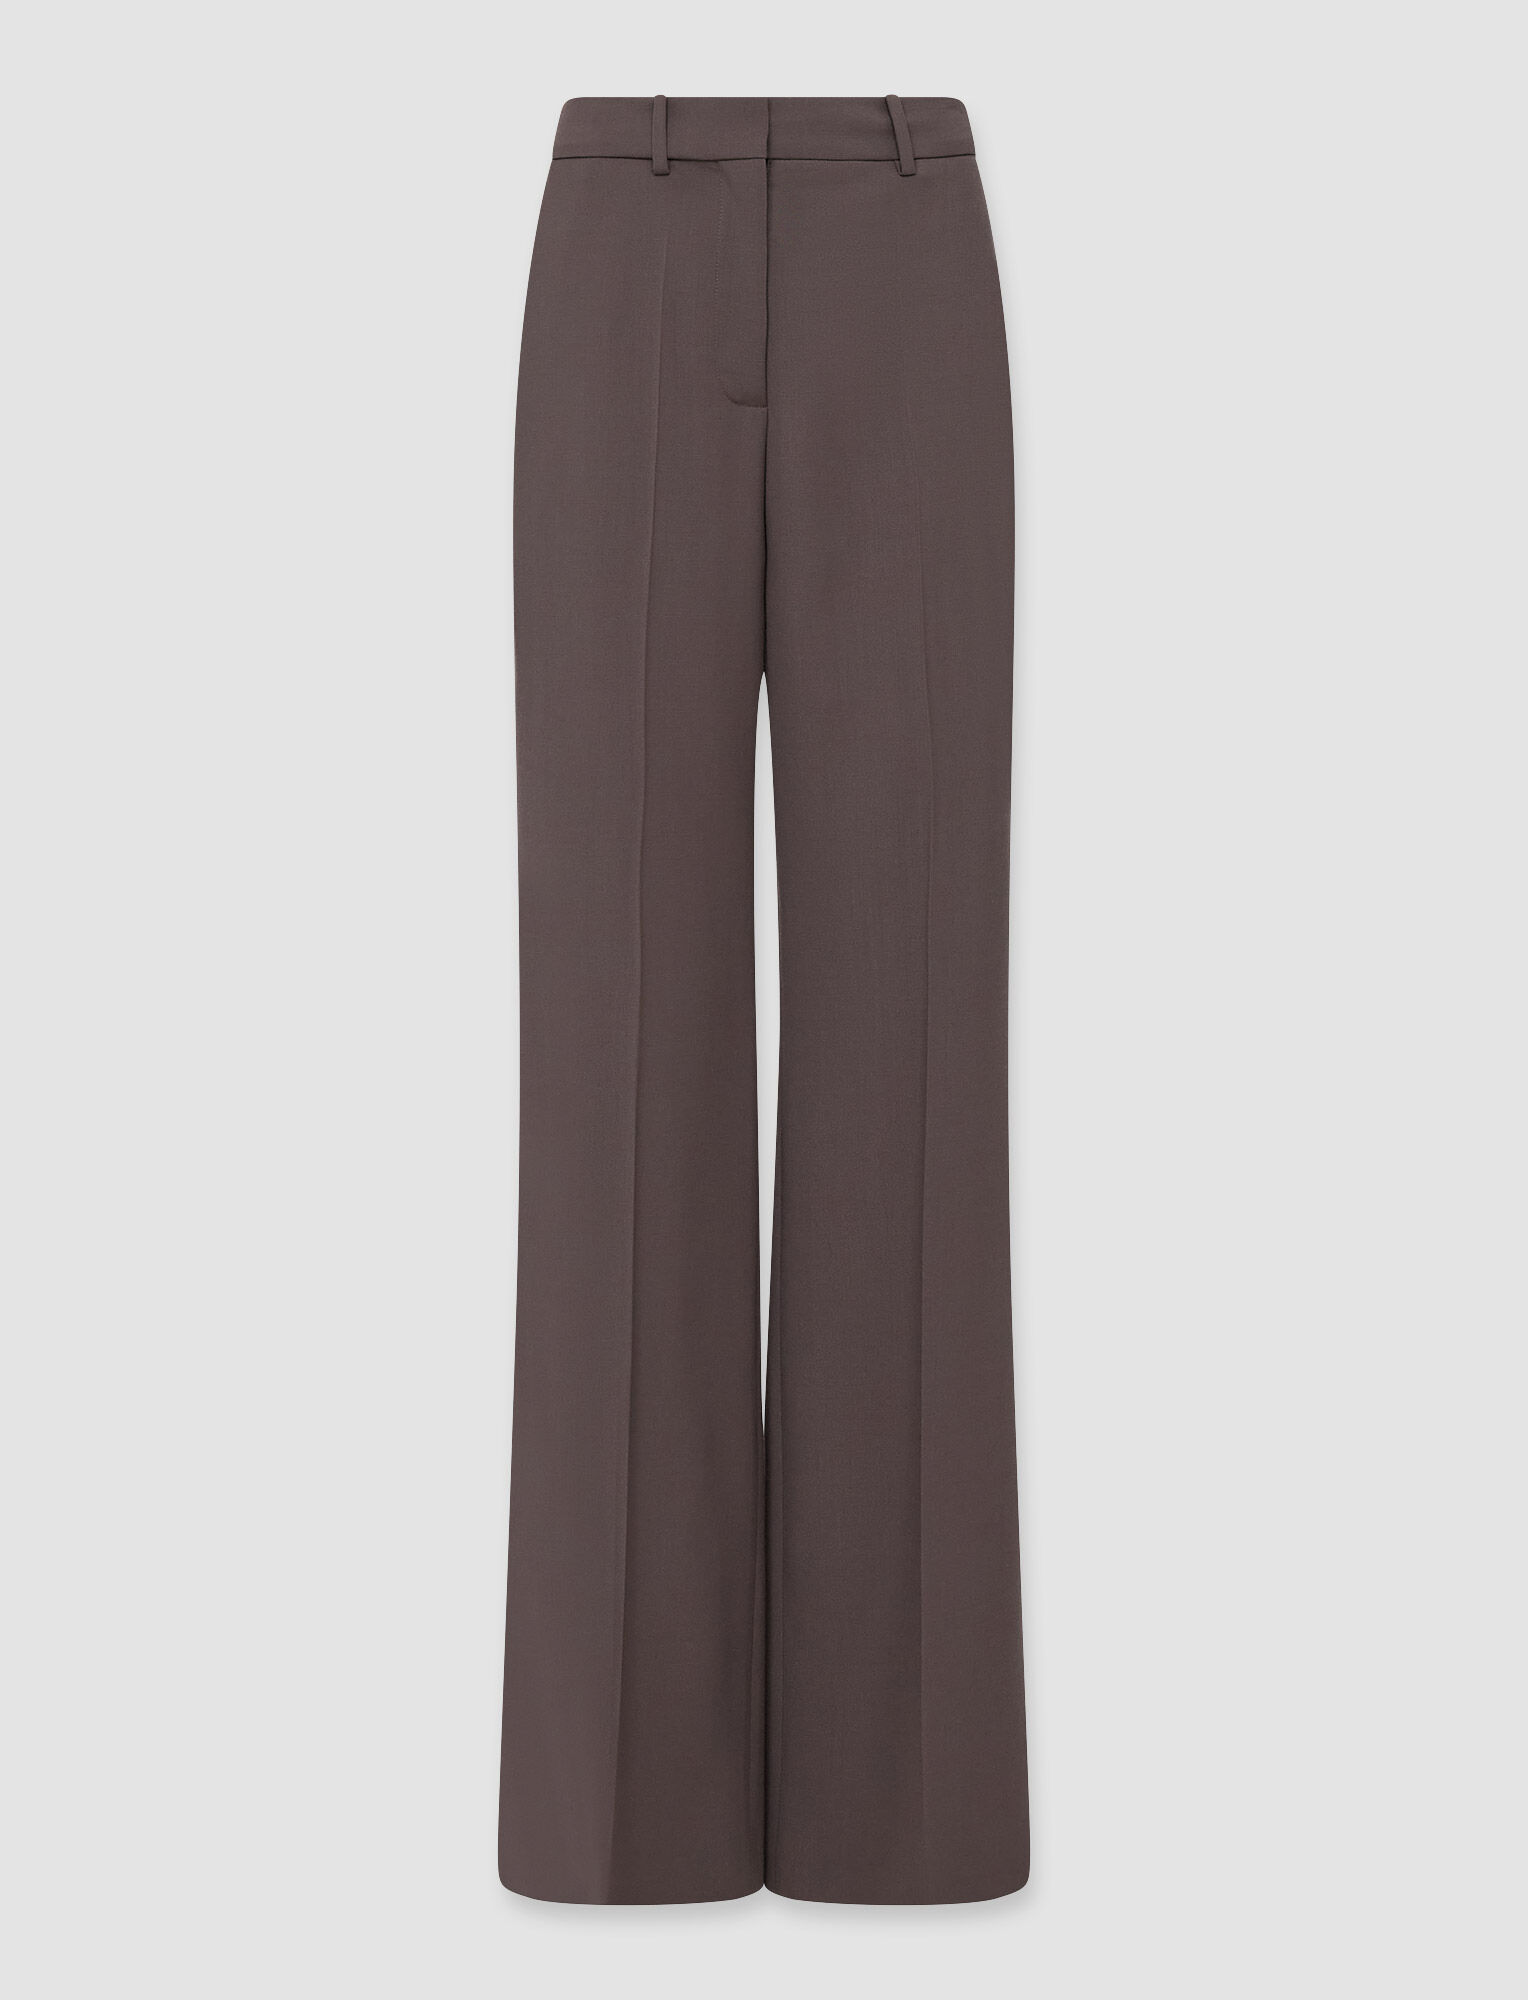 Joseph, Tailoring Wool Stretch Morissey Trousers, in Truffle